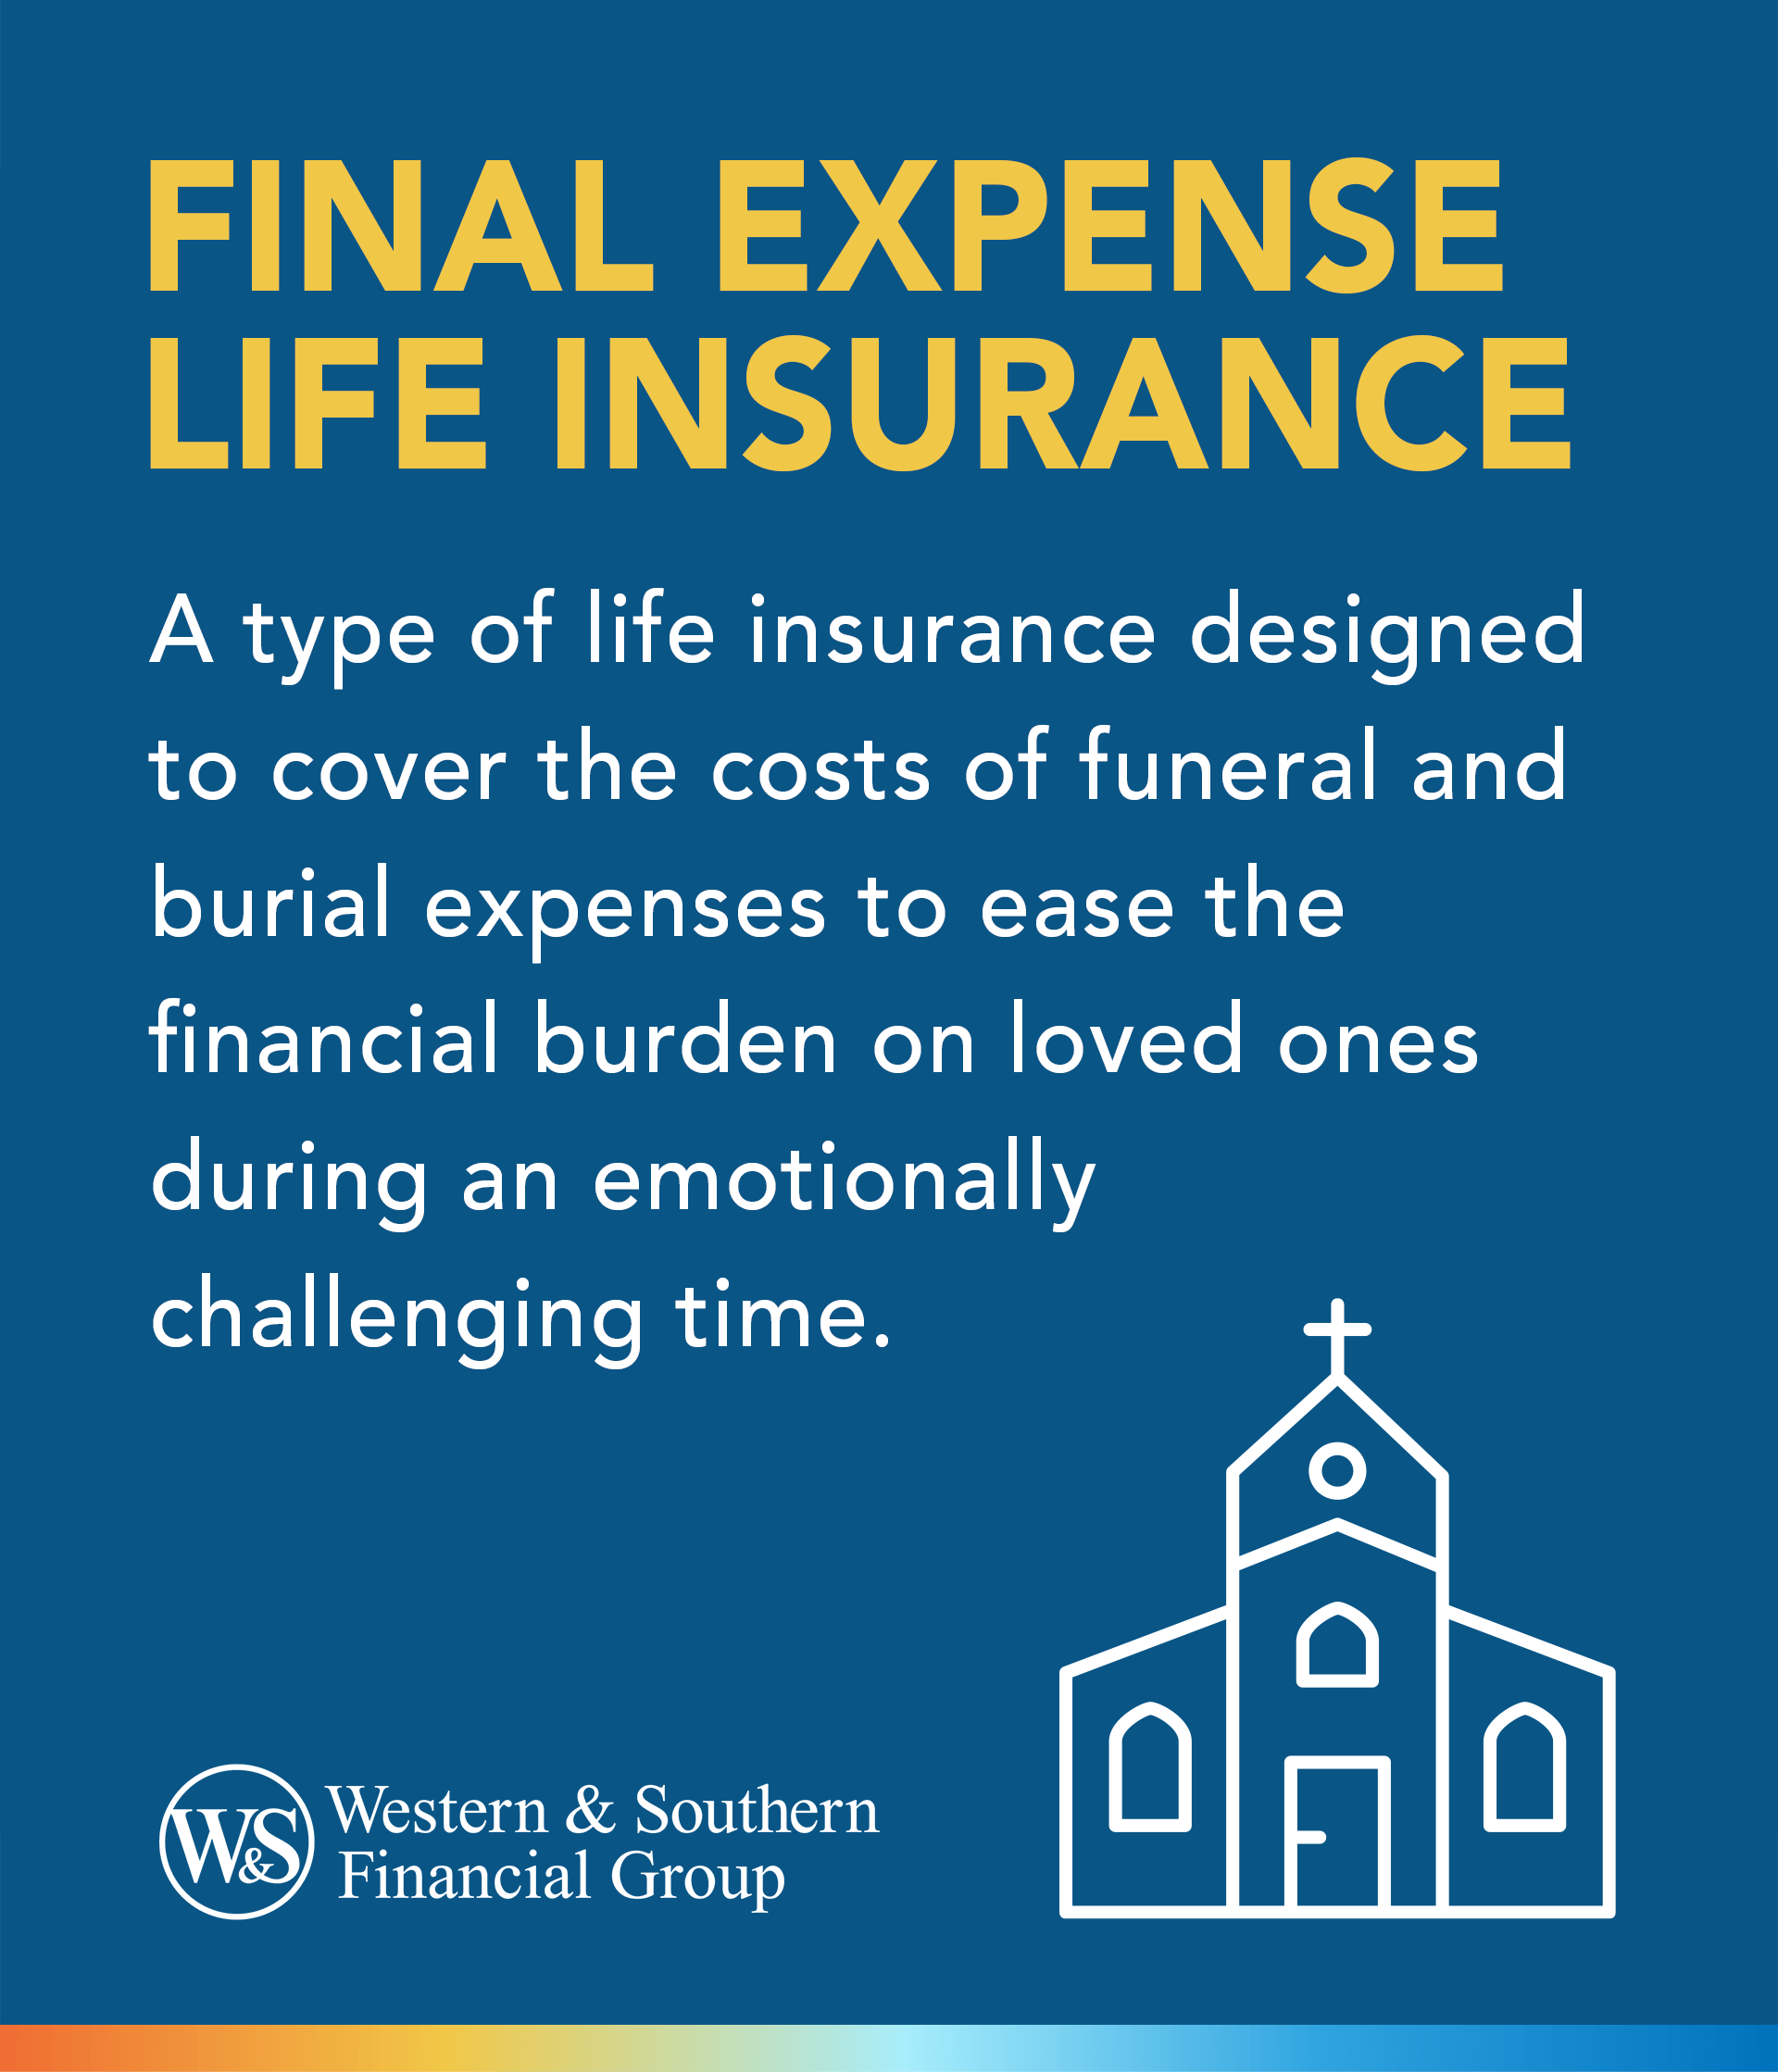 Final Expense Life Insurance Definition